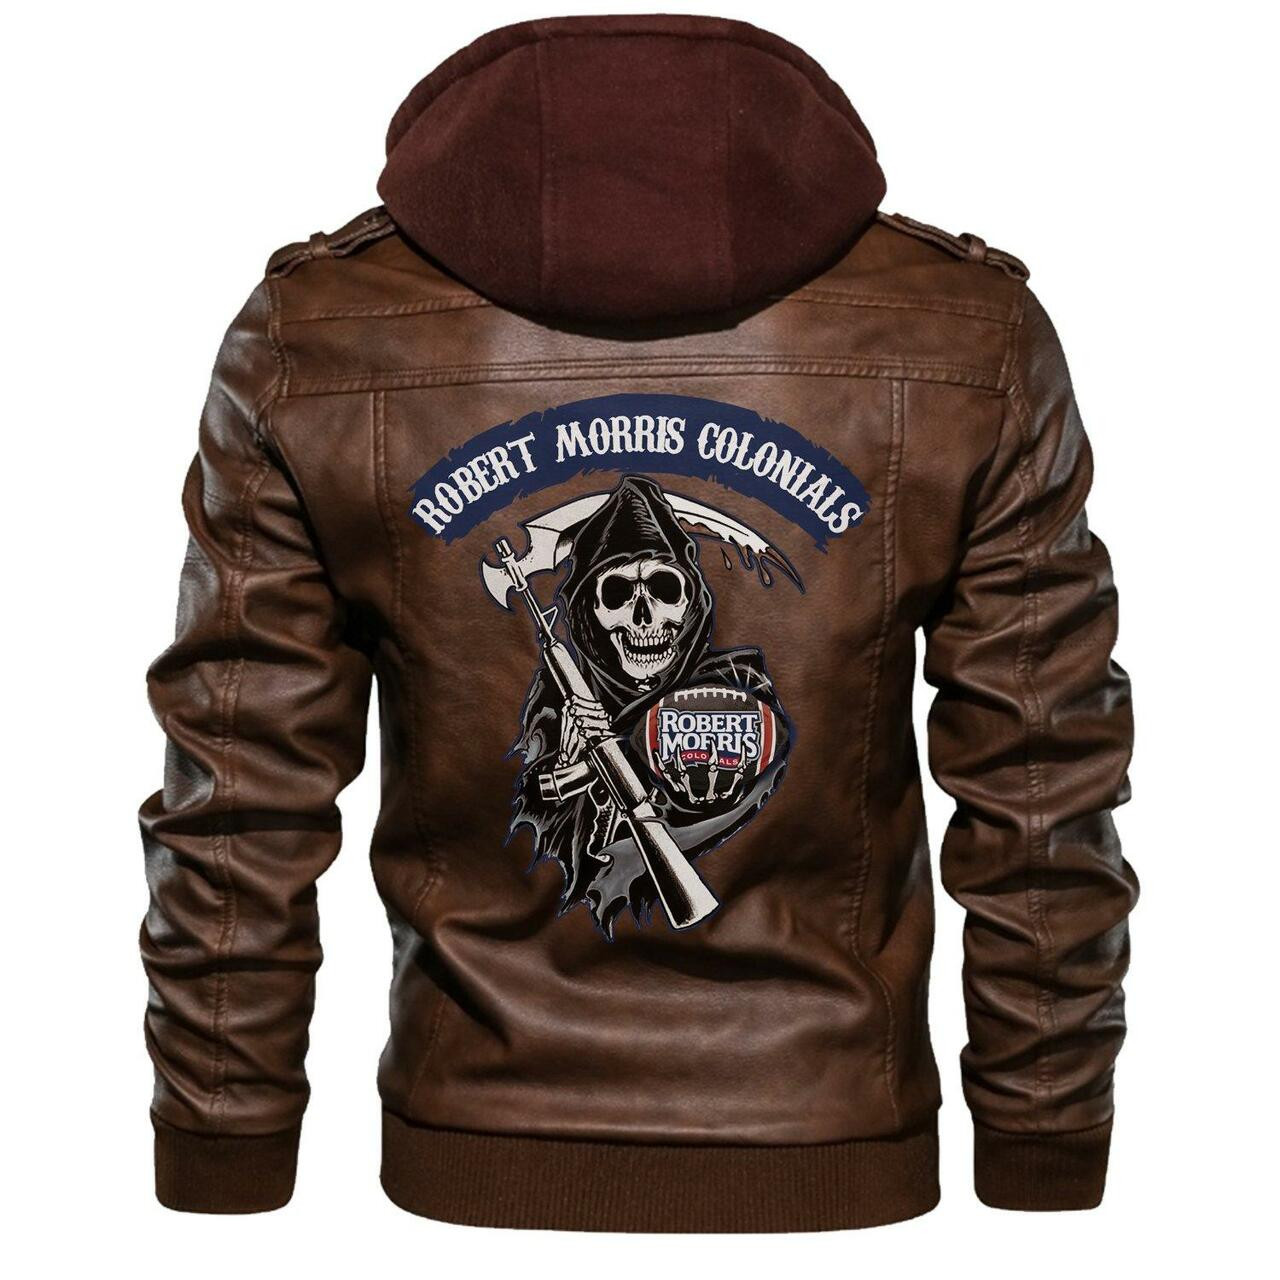 Our store has all of the latest leather jacket 135